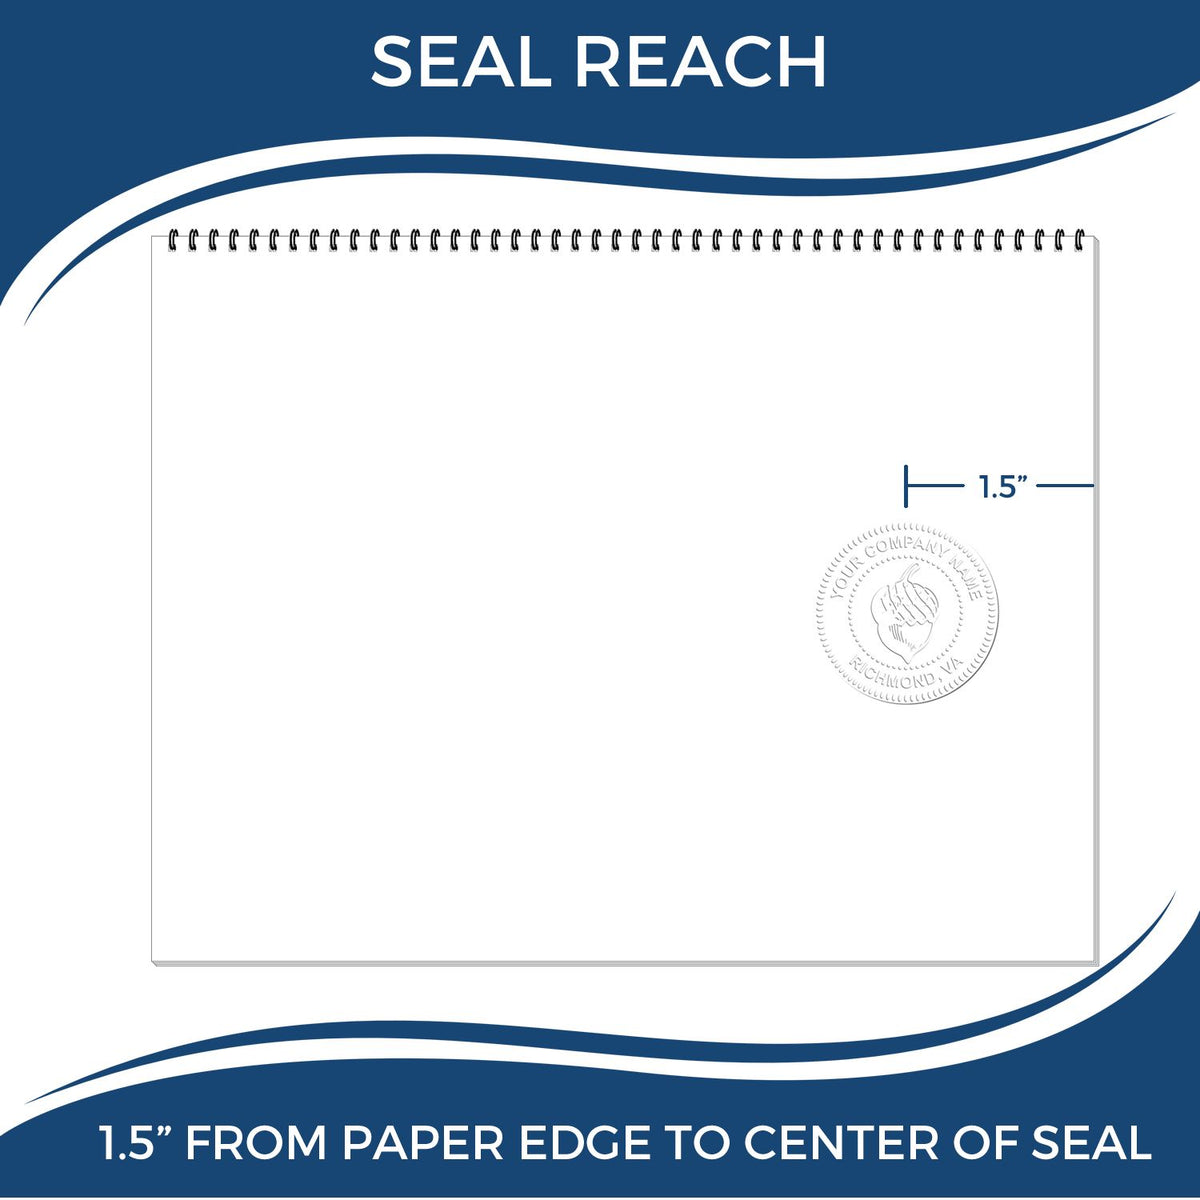 An infographic showing the seal reach which is represented by a ruler and a miniature seal image of the Soft Pocket New Mexico Landscape Architect Embosser